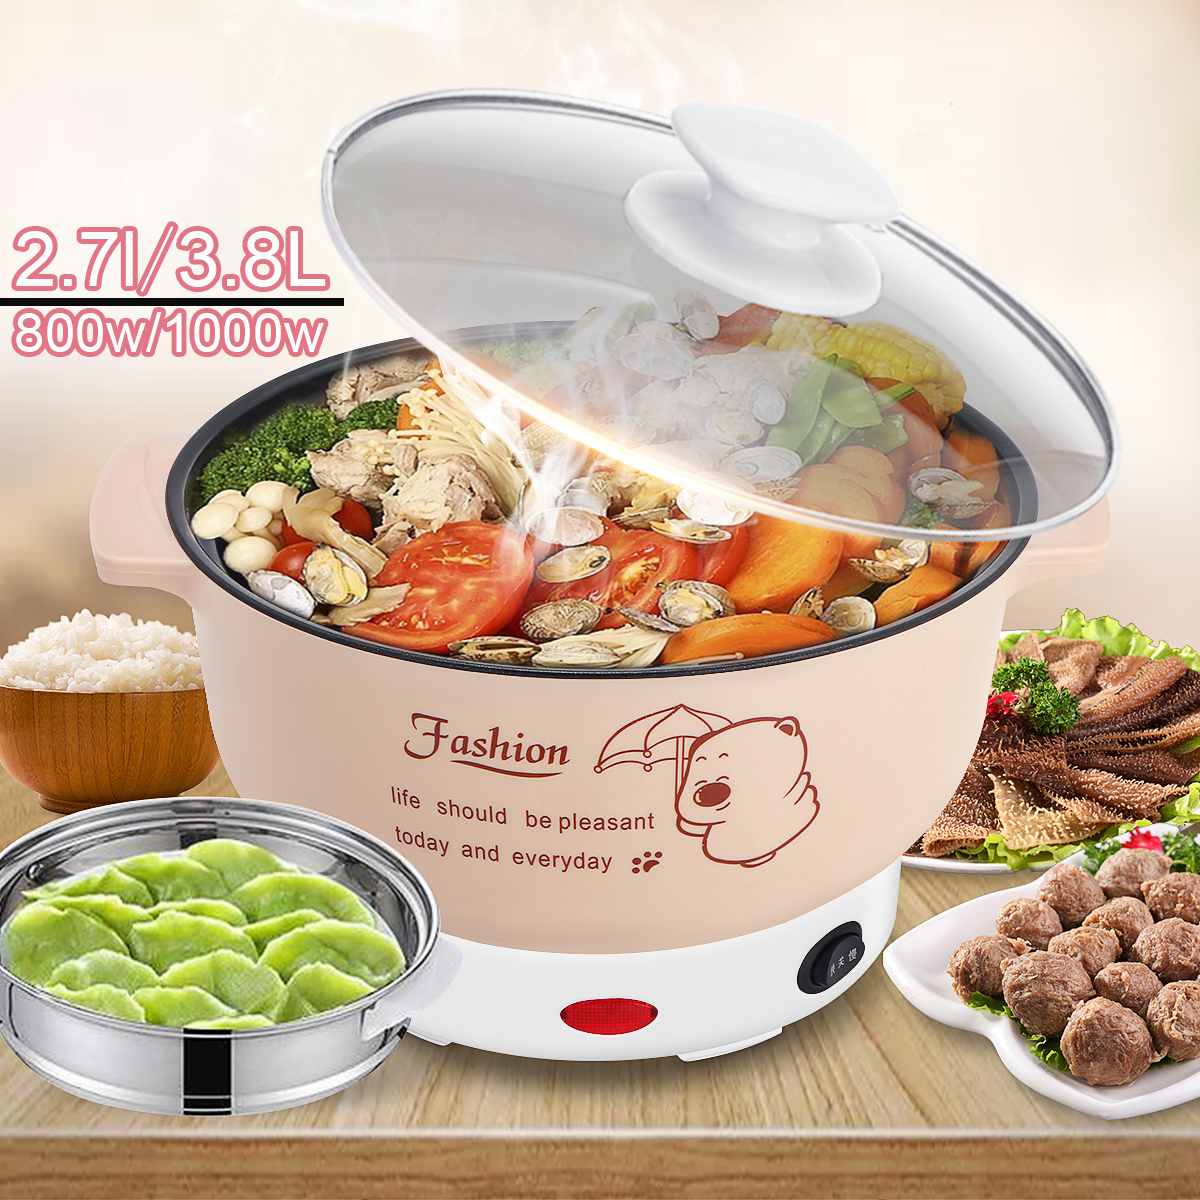 1000W 220V Mini Rice Cooker Electric cooker Multi Electric Cooking Machine Single/Double Layer HotPot Rice Cooker Non-stick pan